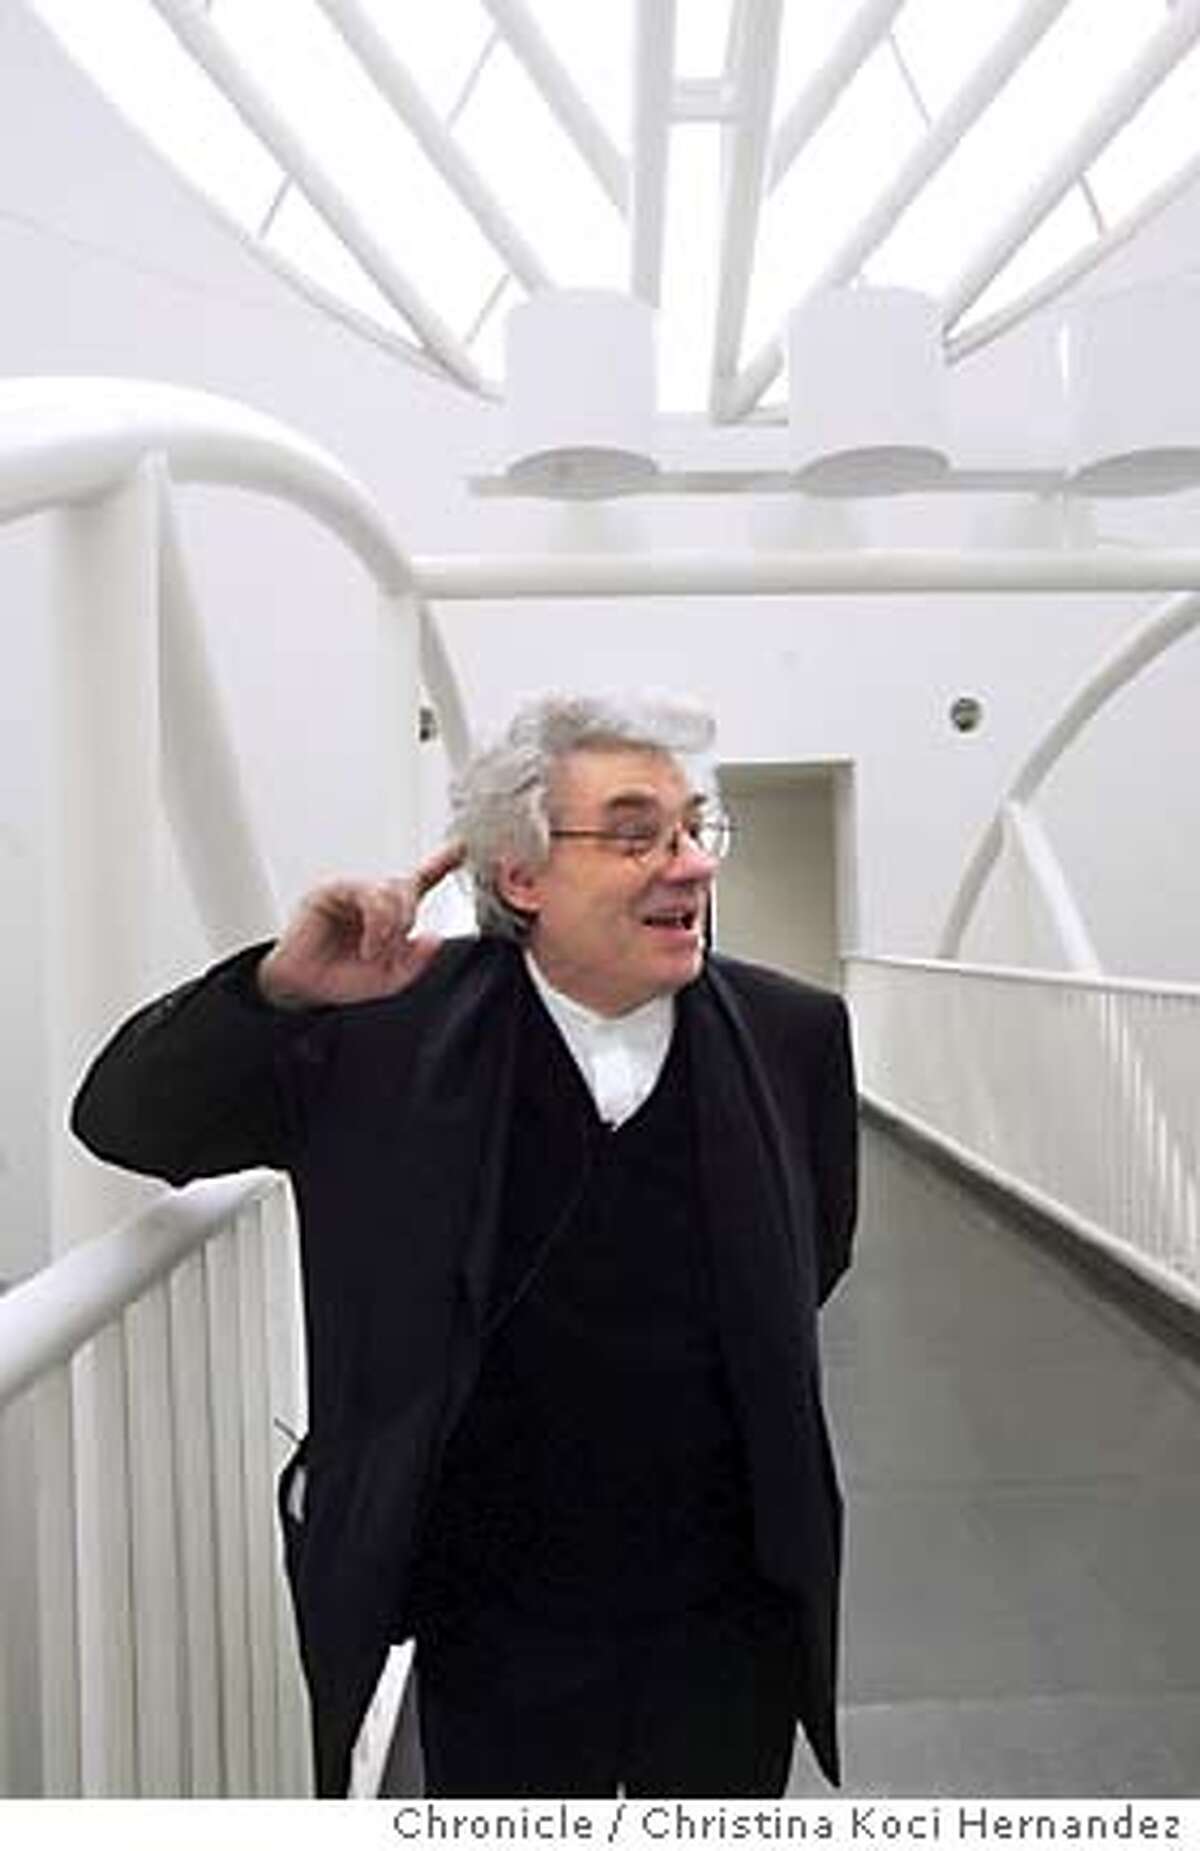 Botta on bridge.Story is interview with Mario Botta, architect for SFMoMa. We need portraits of him inside the atrium and outside the building. .CHRISTINA KOCI HERNANDEZ/CHRONICLE